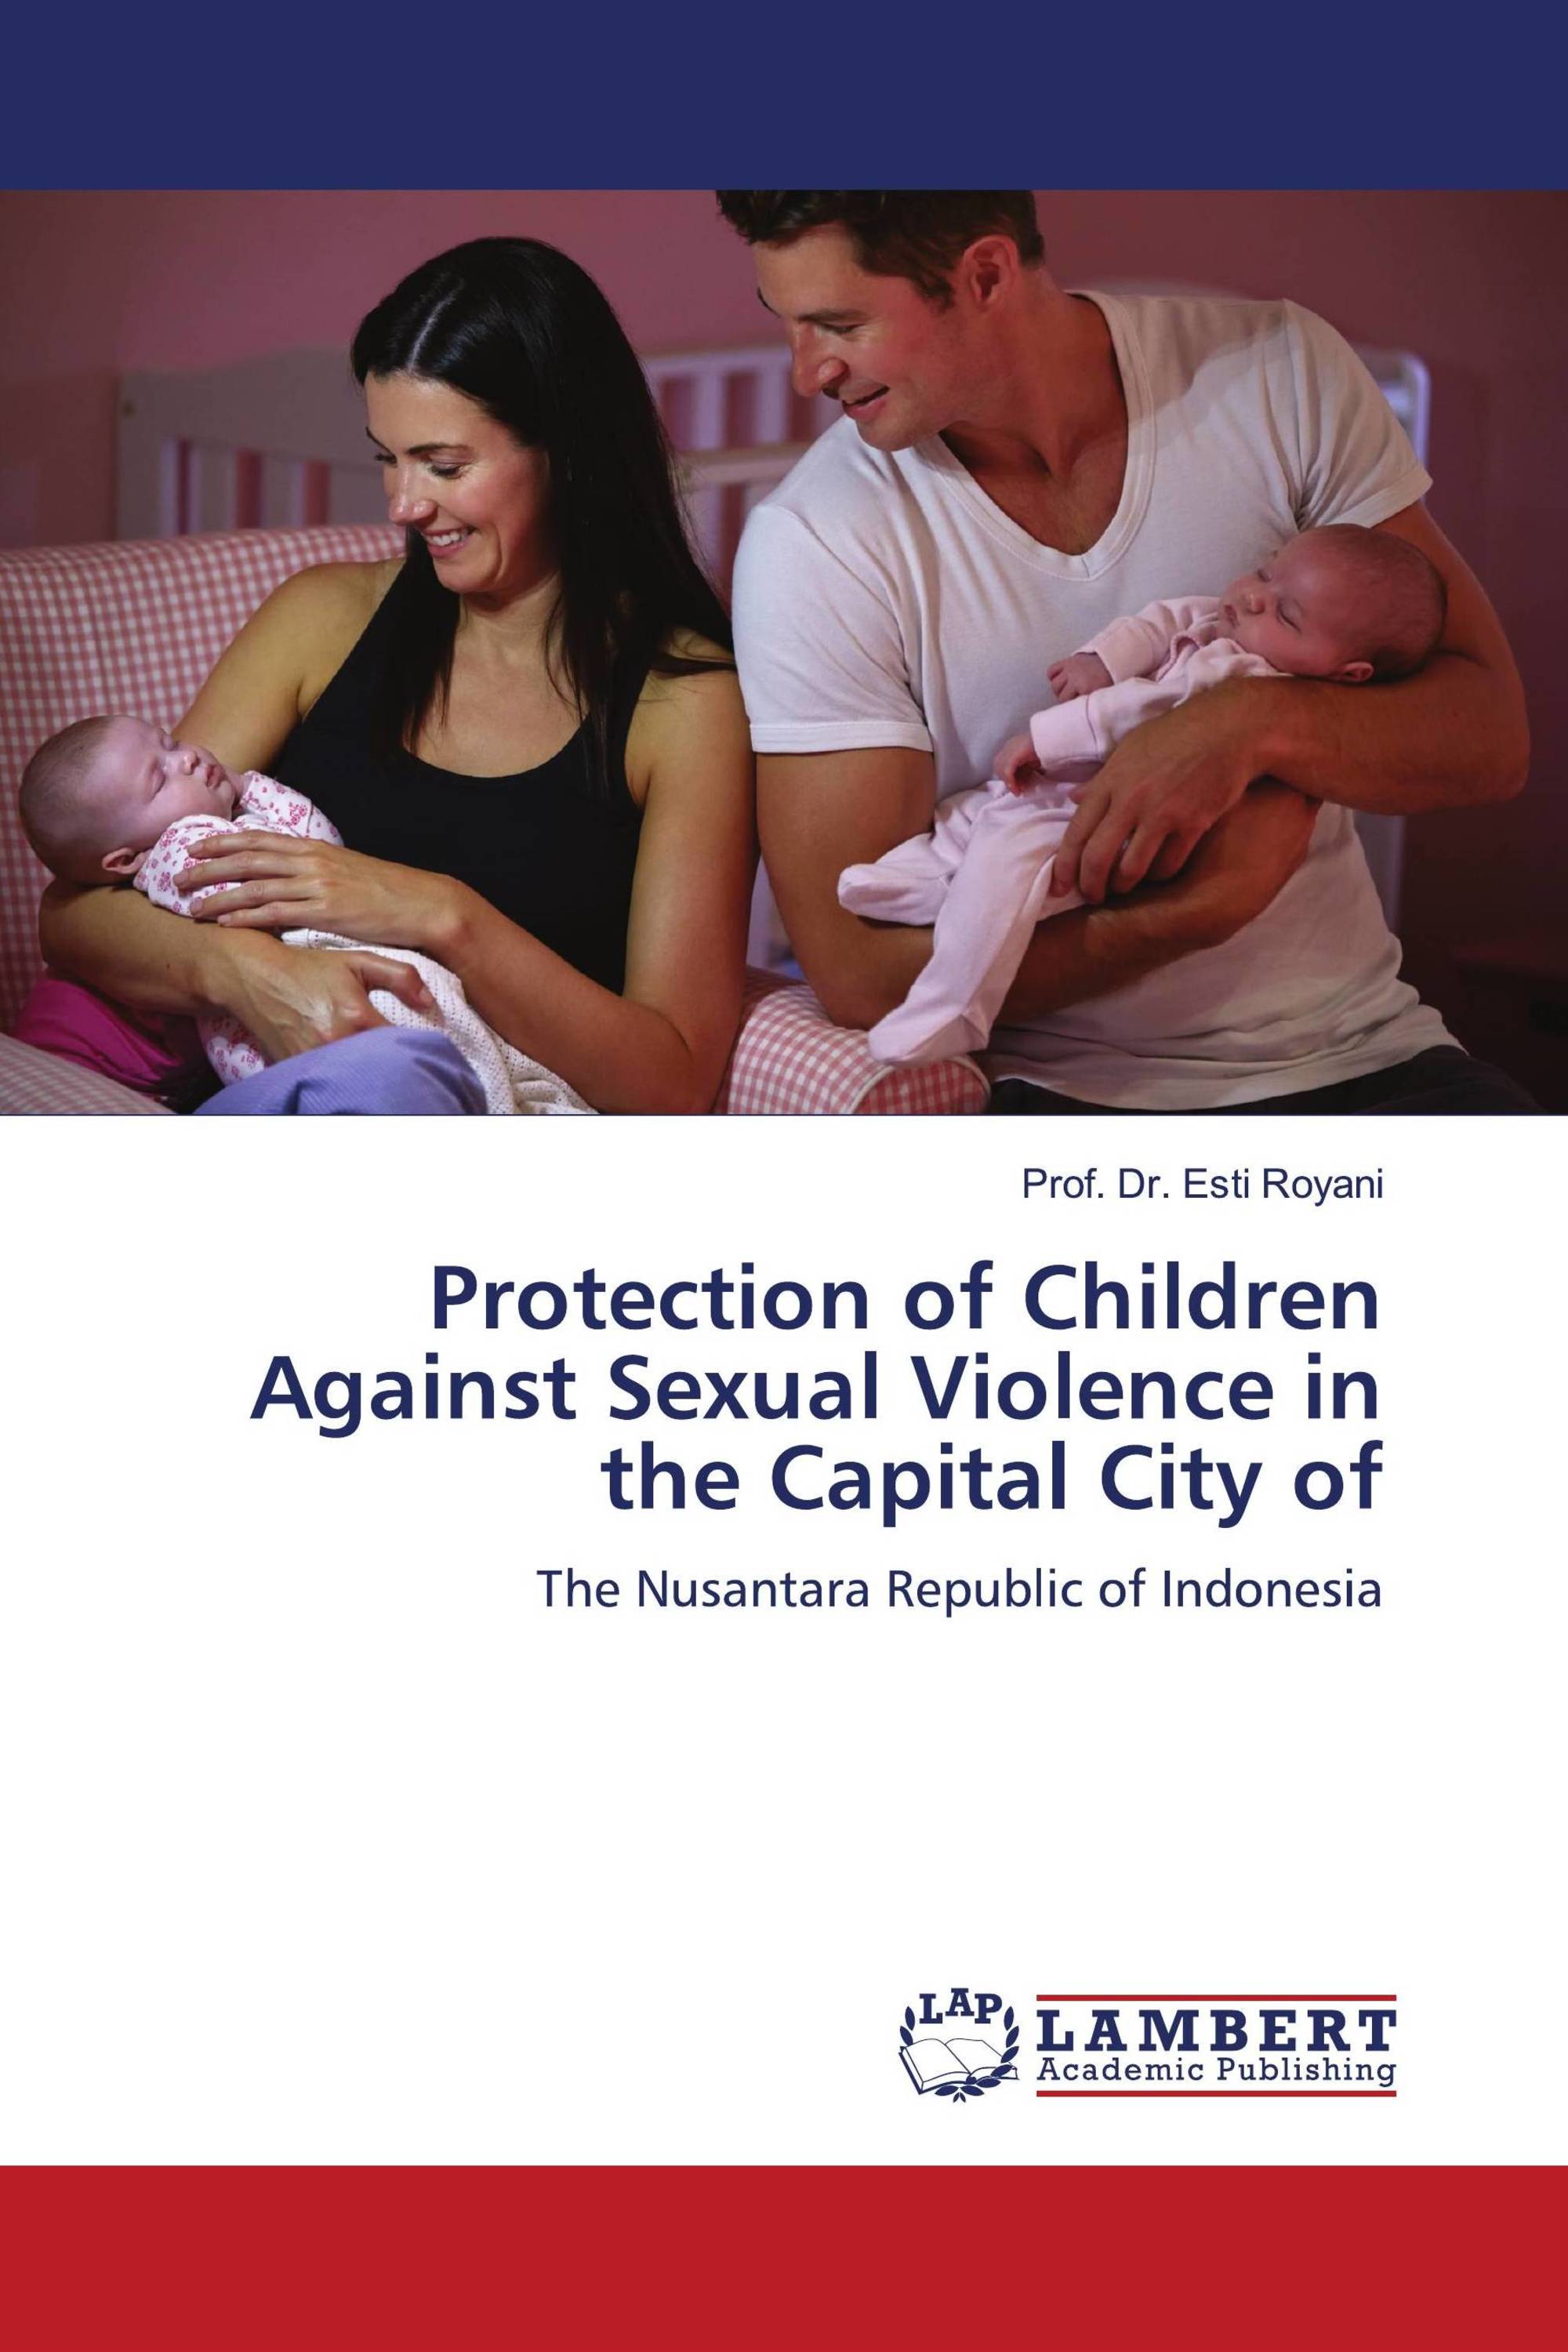 Protection of Children Against Sexual Violence in the Capital City of